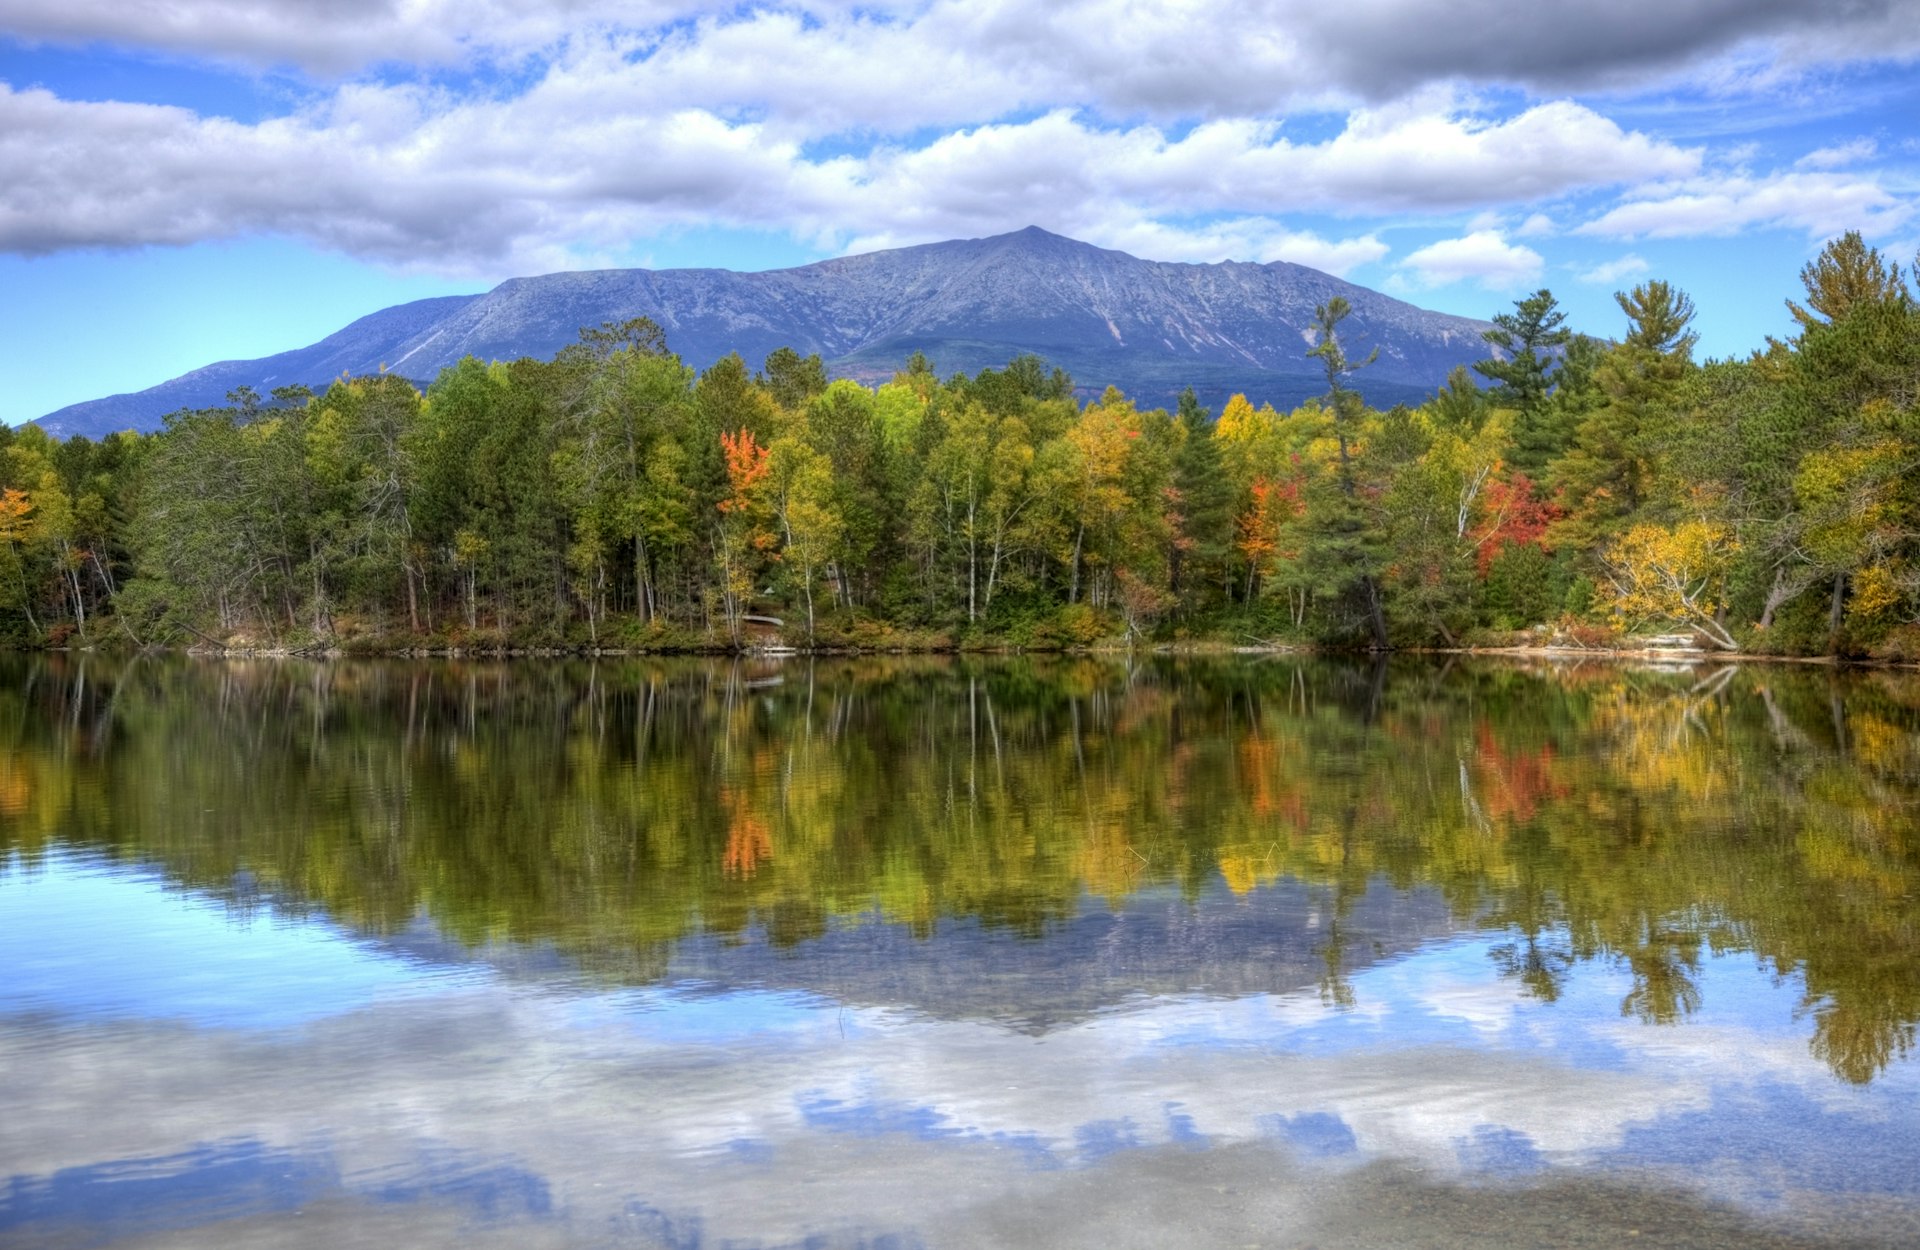 Mount Katahdin reflected in a lake at Baxter State Park, Maine